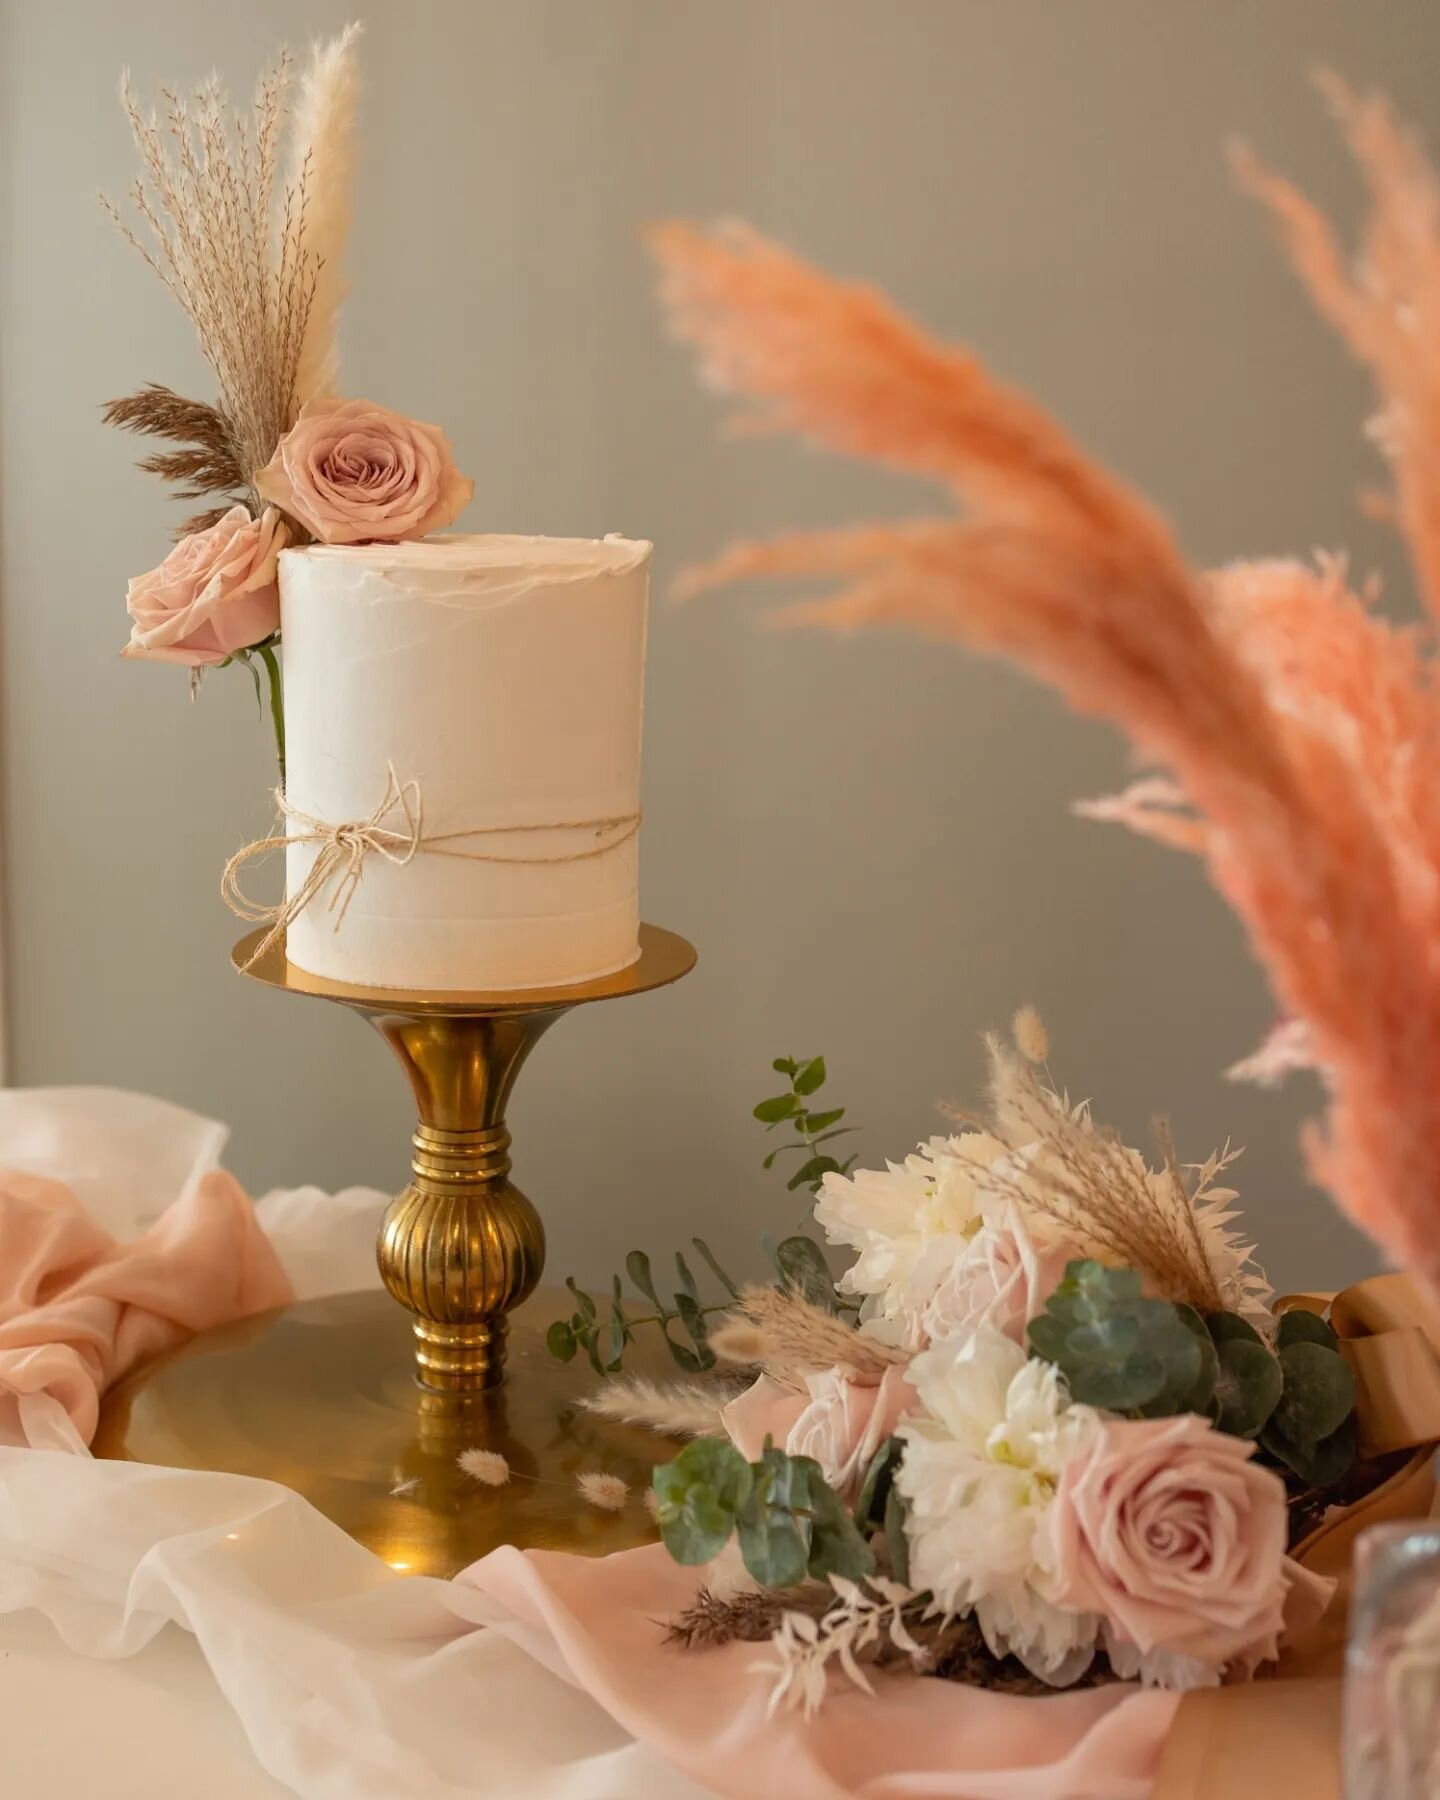 I always wanted to put pampas on a cake and I couldn't have imagined something sweeter than this as the result 💕
Boho wedding vibes are the ultimate dream! Love this cake.
.
.
.
.
.
.
.
.
Photographer - @neenabrostowskiphotography 
Flowers - @lakefl